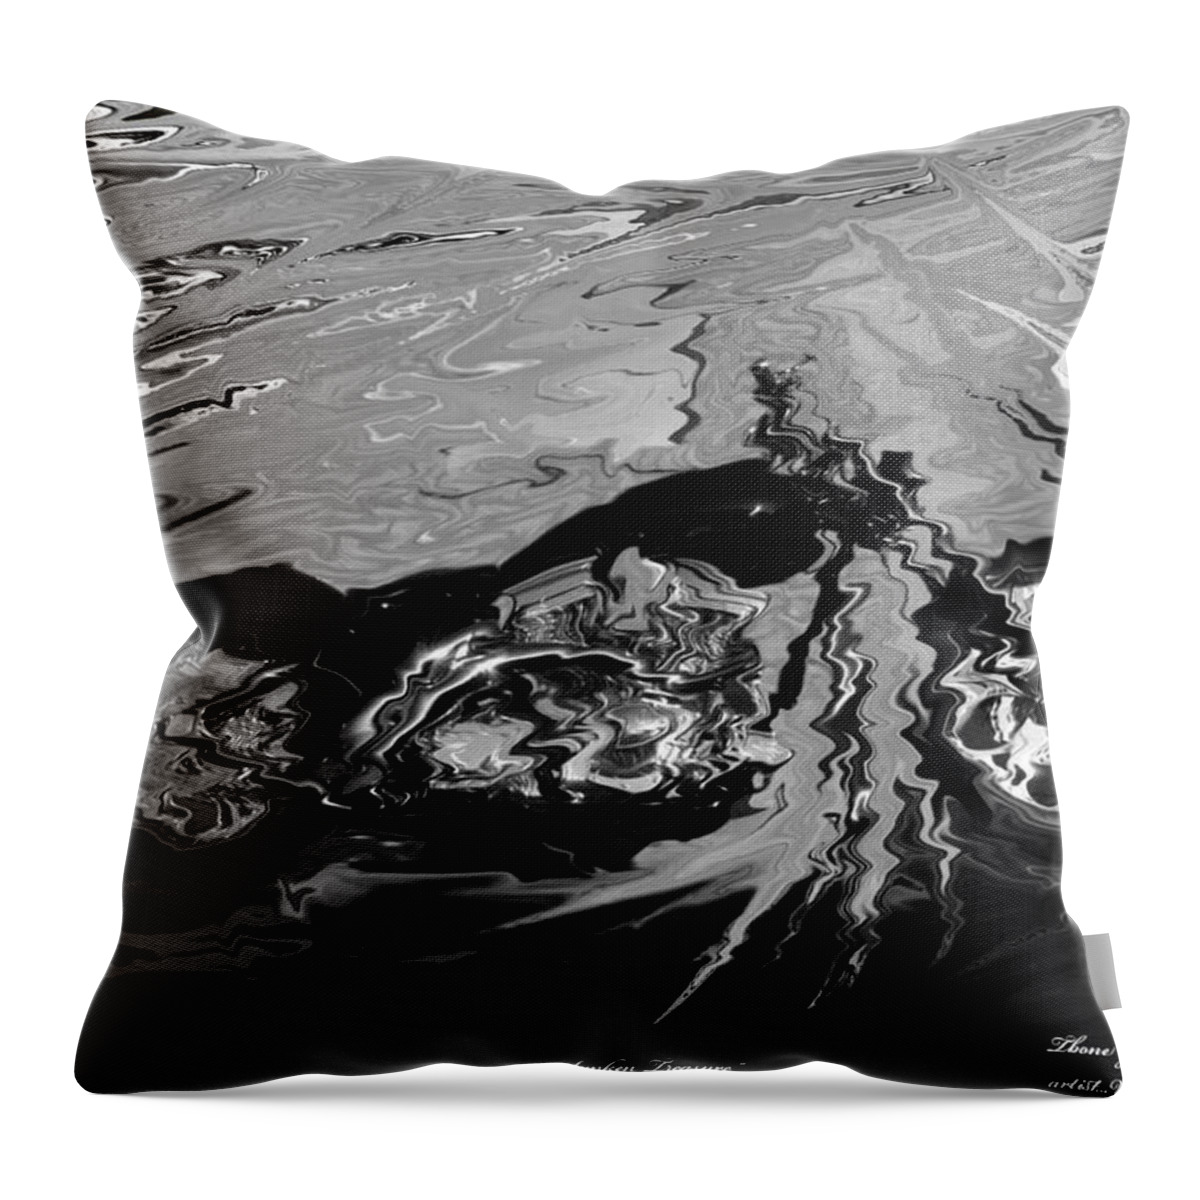 Motorcycles Throw Pillow featuring the painting Sunken Treasure by Wayne Bonney